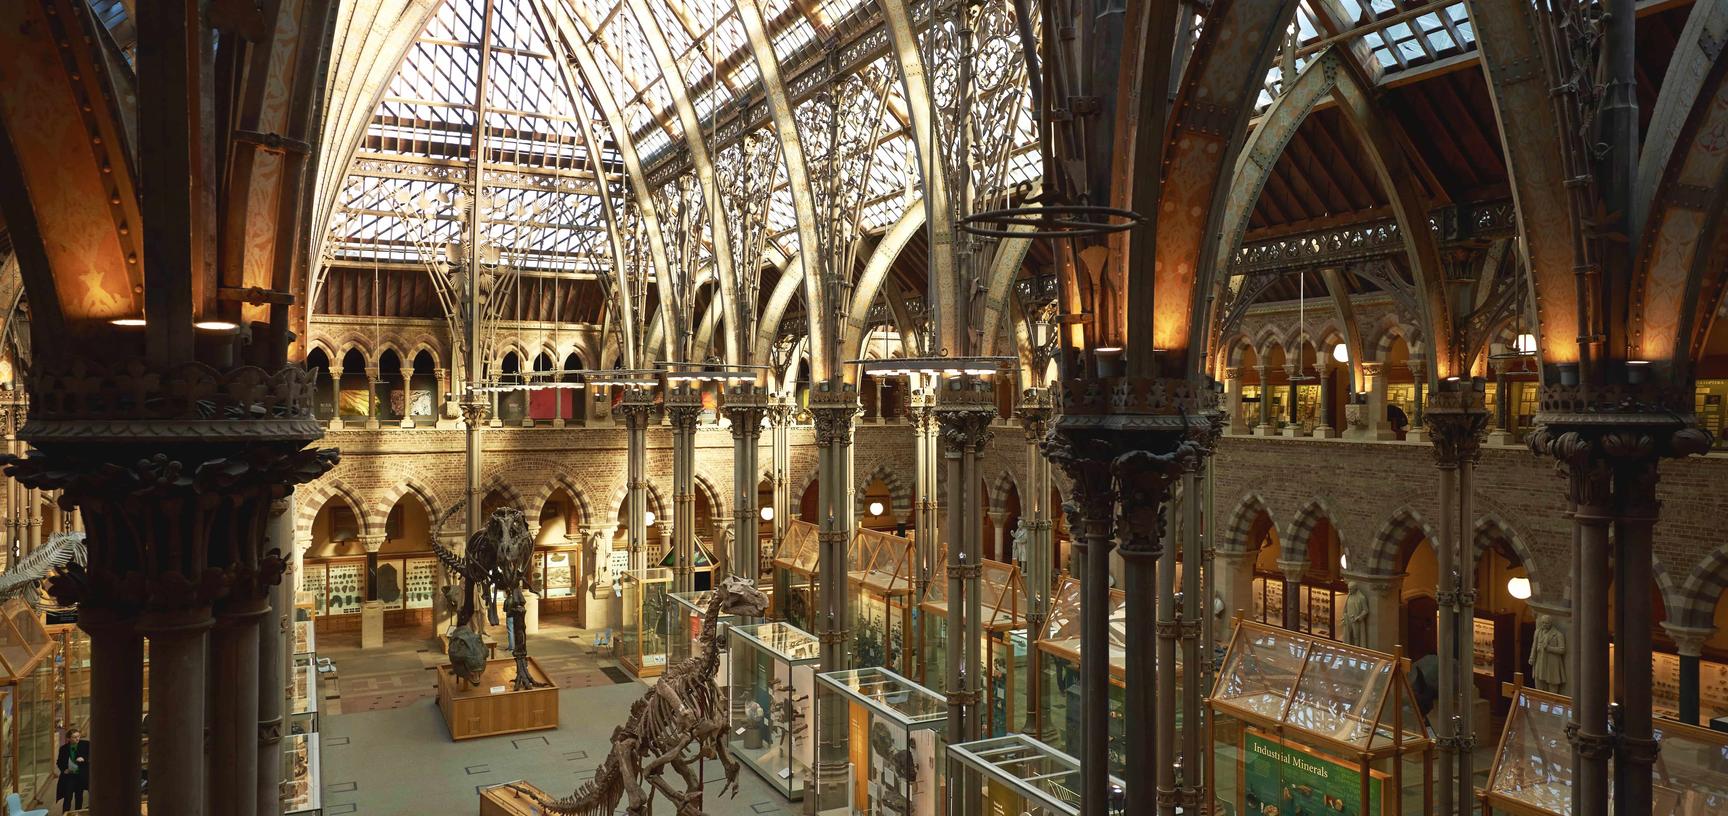 View of cathedral-like iron and glass court featuring two central dinosaur skeletons flanked by glass showcases